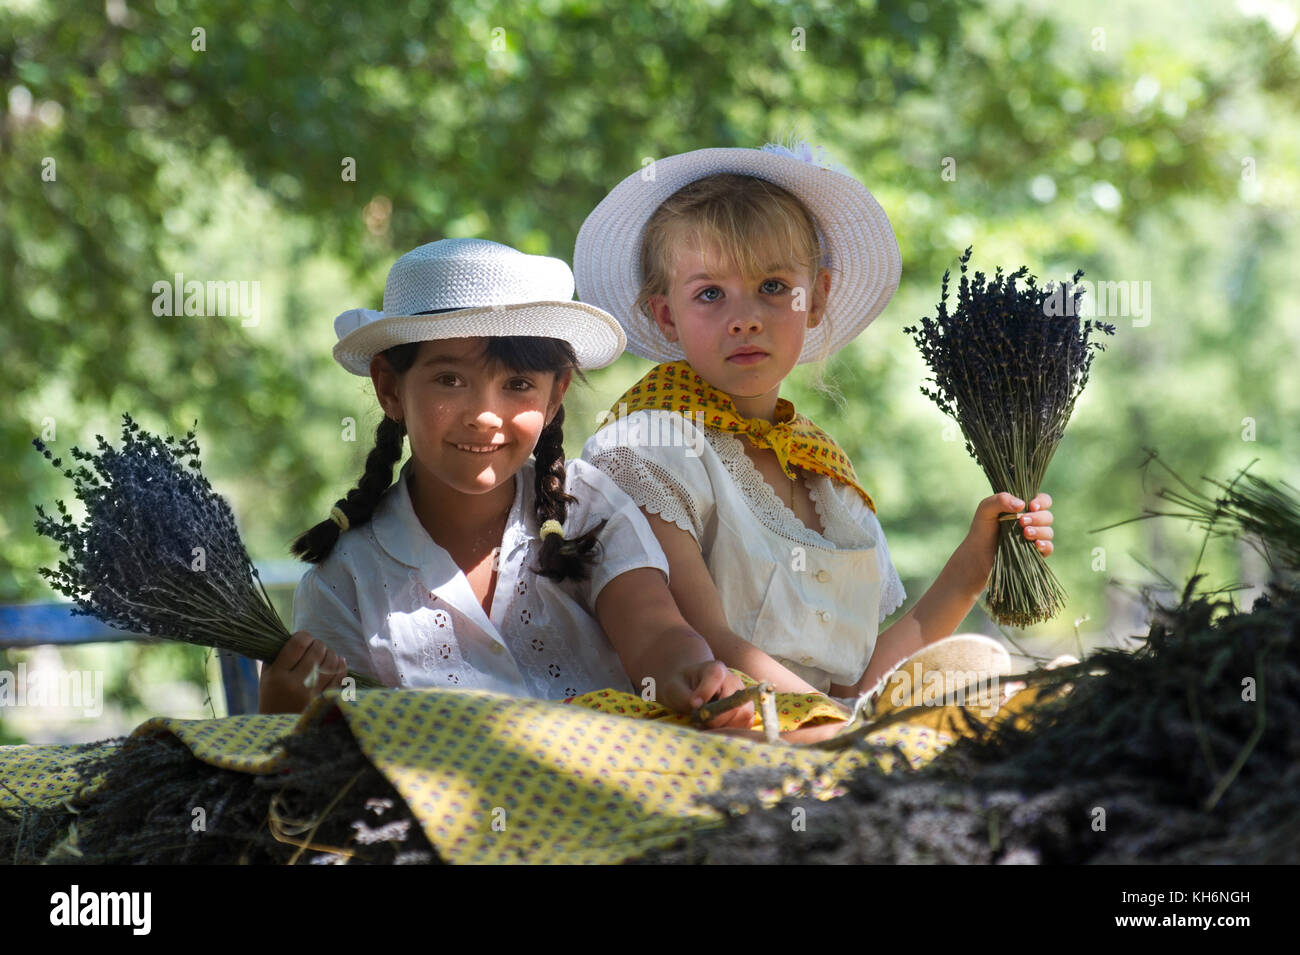 Europe, France, Vaucluse, (84), Pays de Sault. Lavender festival, two girl in costume. Stock Photo